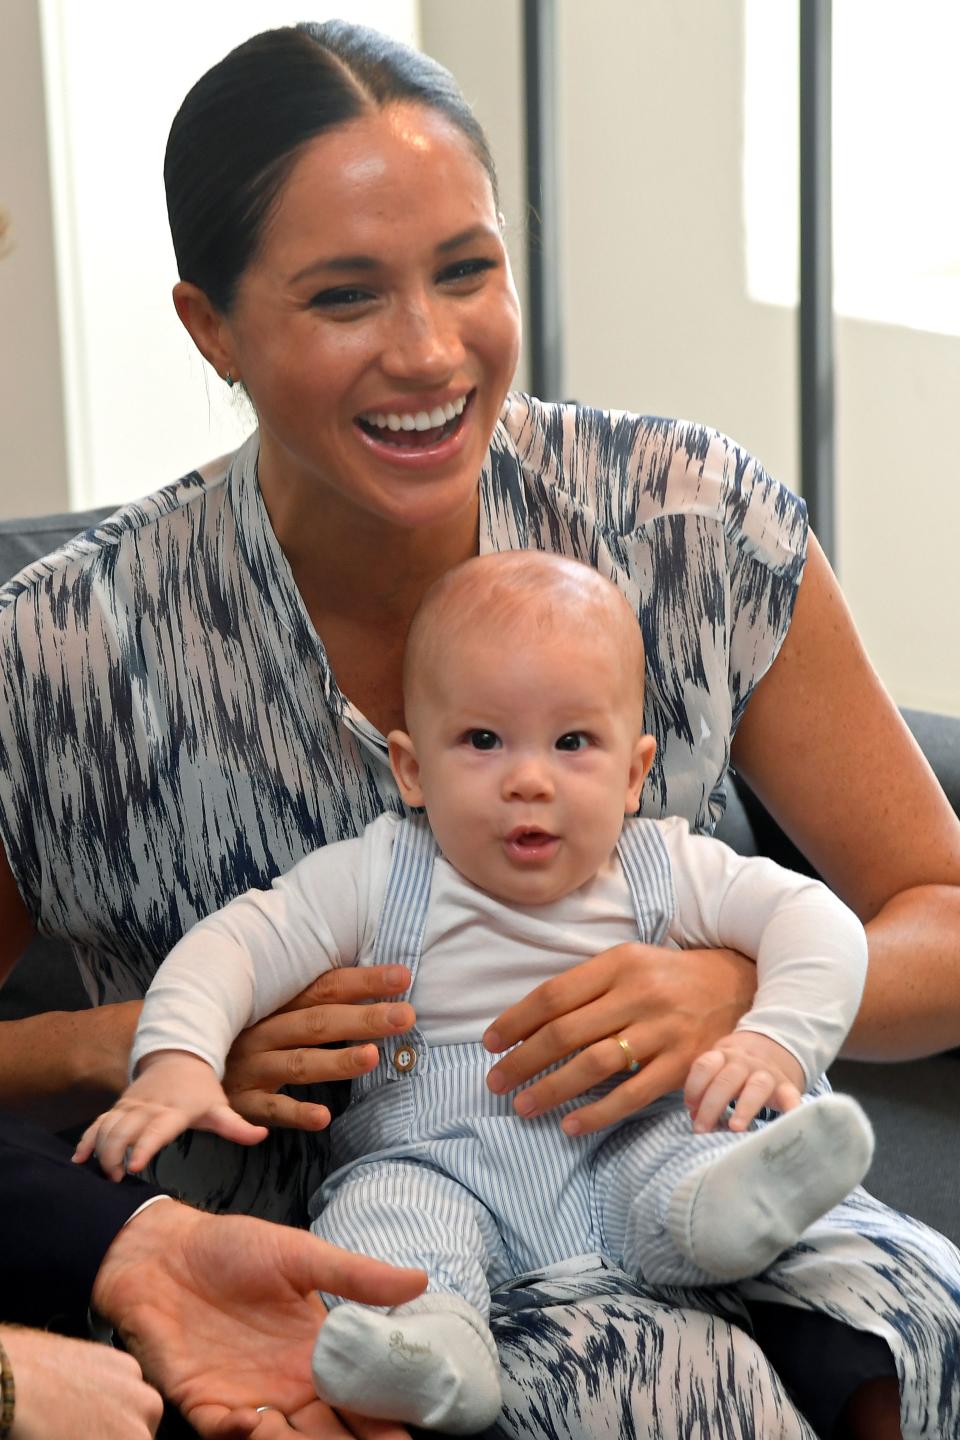 Archie was adorably cuddled by his parents during the meeting. Photo: Reuters